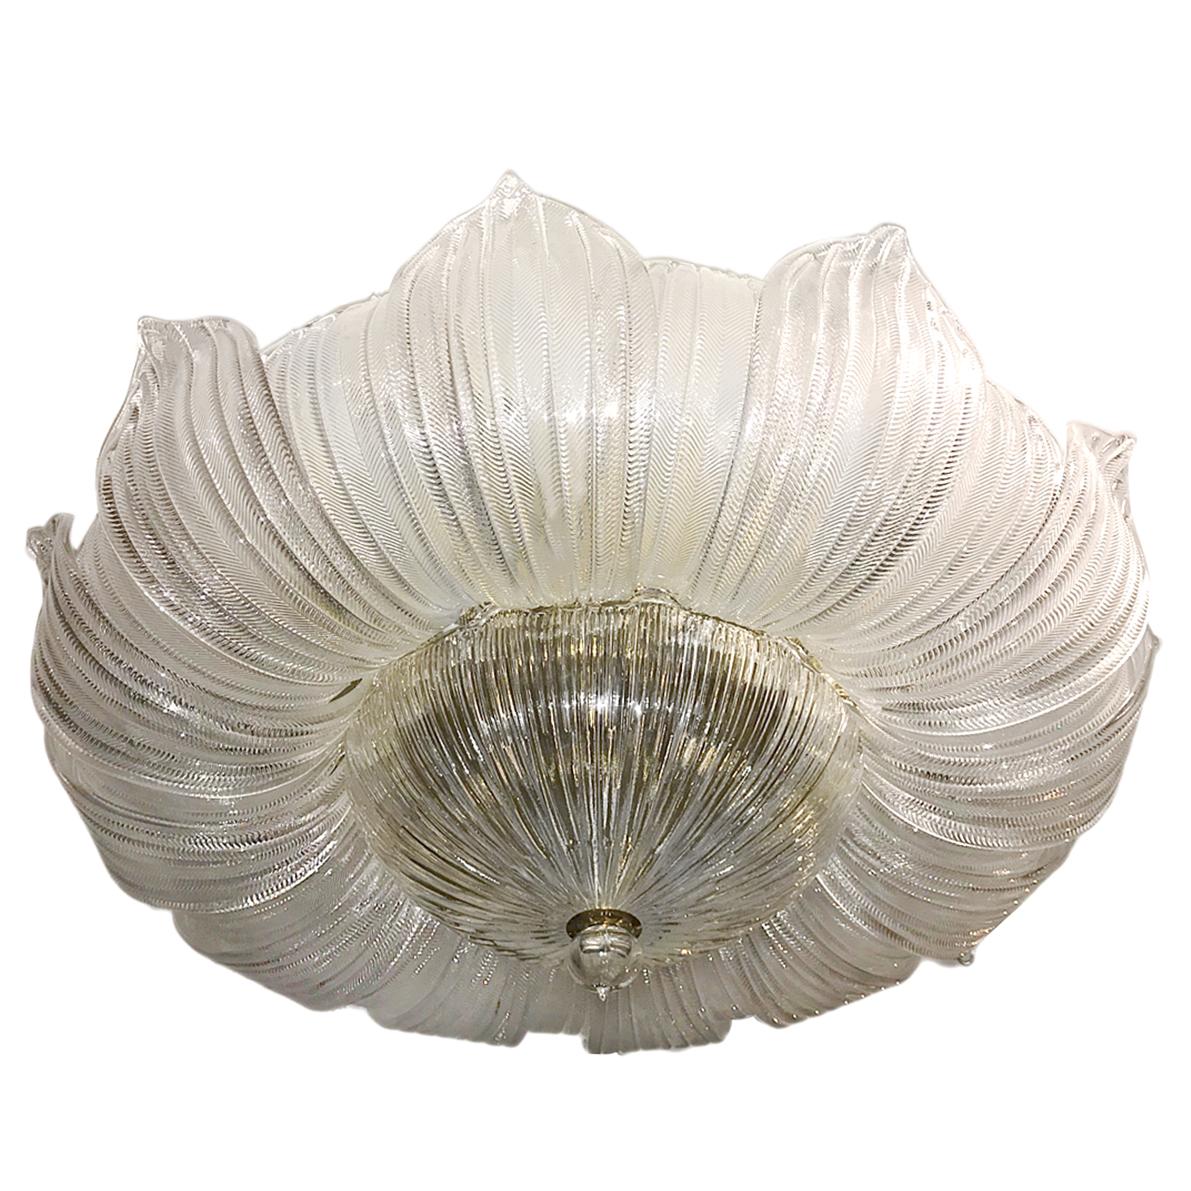 A circa 1960s large Italian blown and molded glass light fixture with 8 interior lights in the shape of a flower.